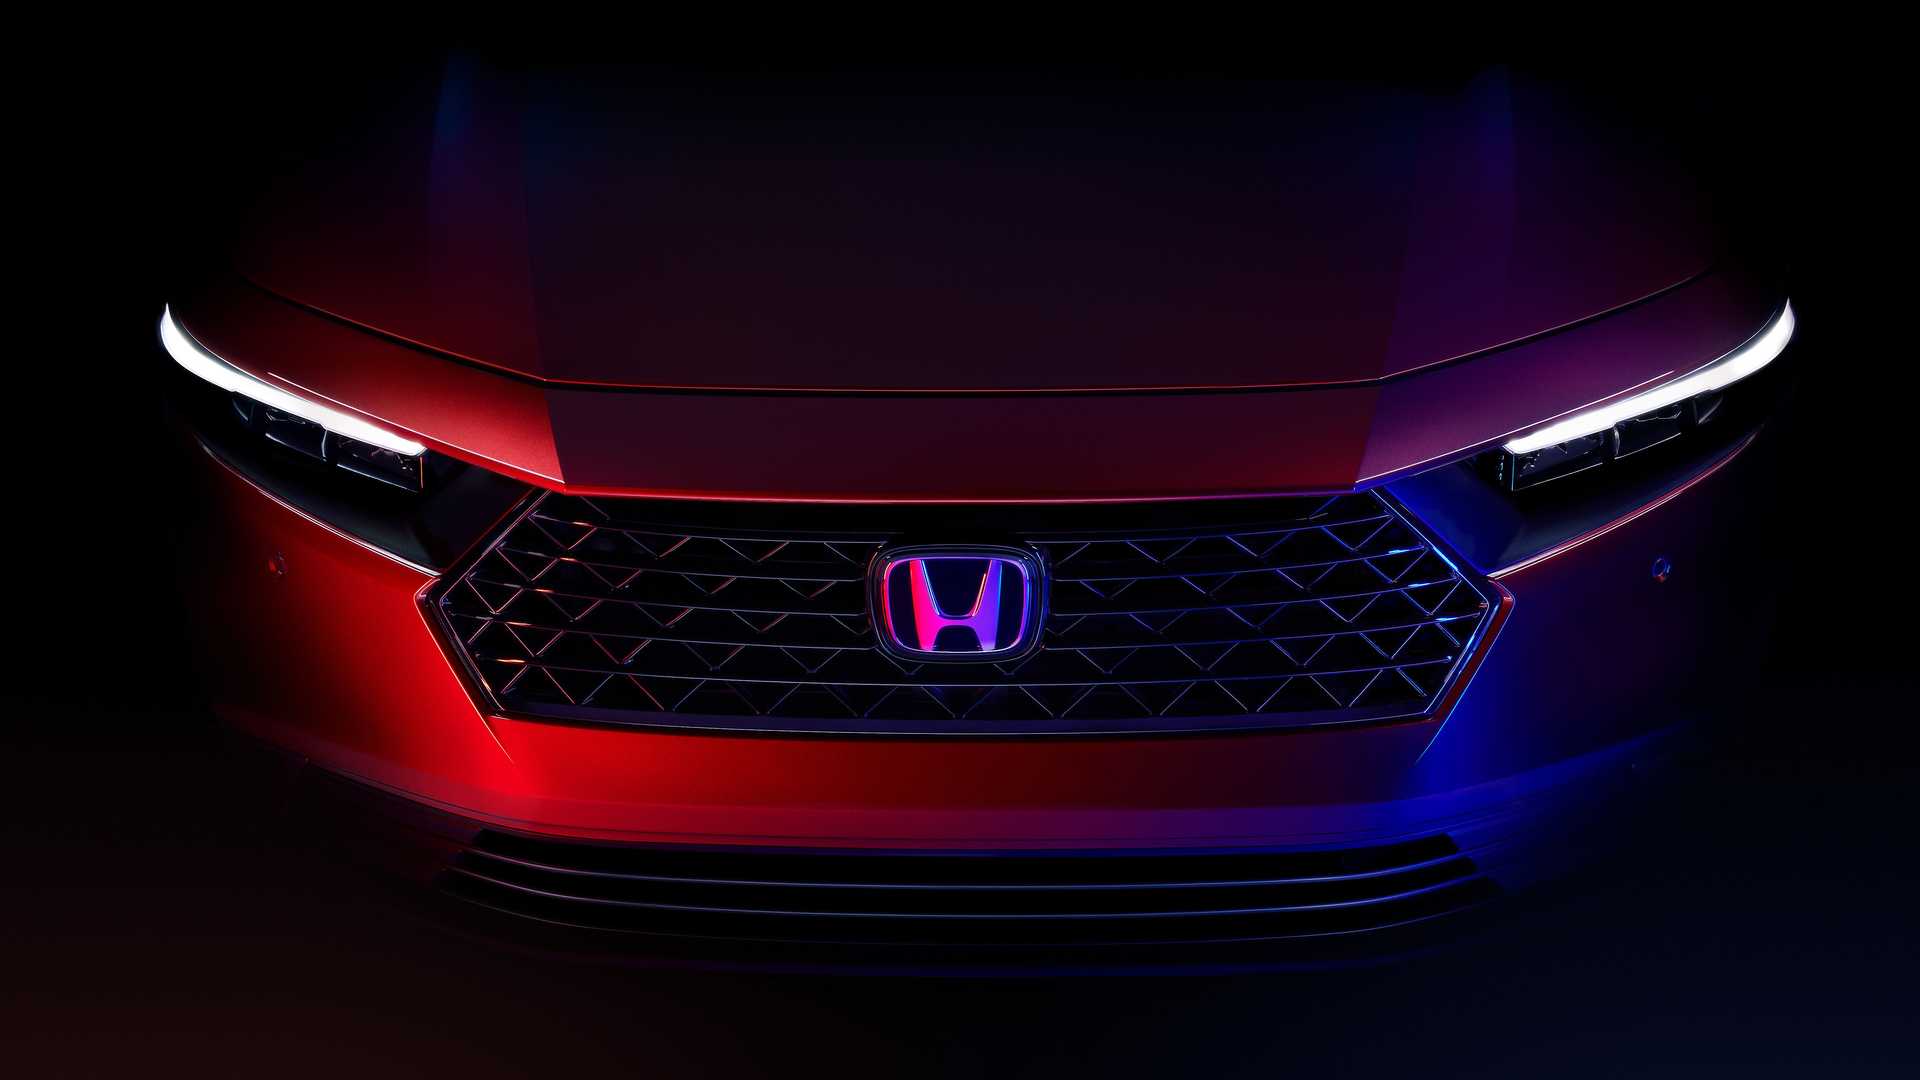 2023-honda-accord-teasers-front-end.jpg